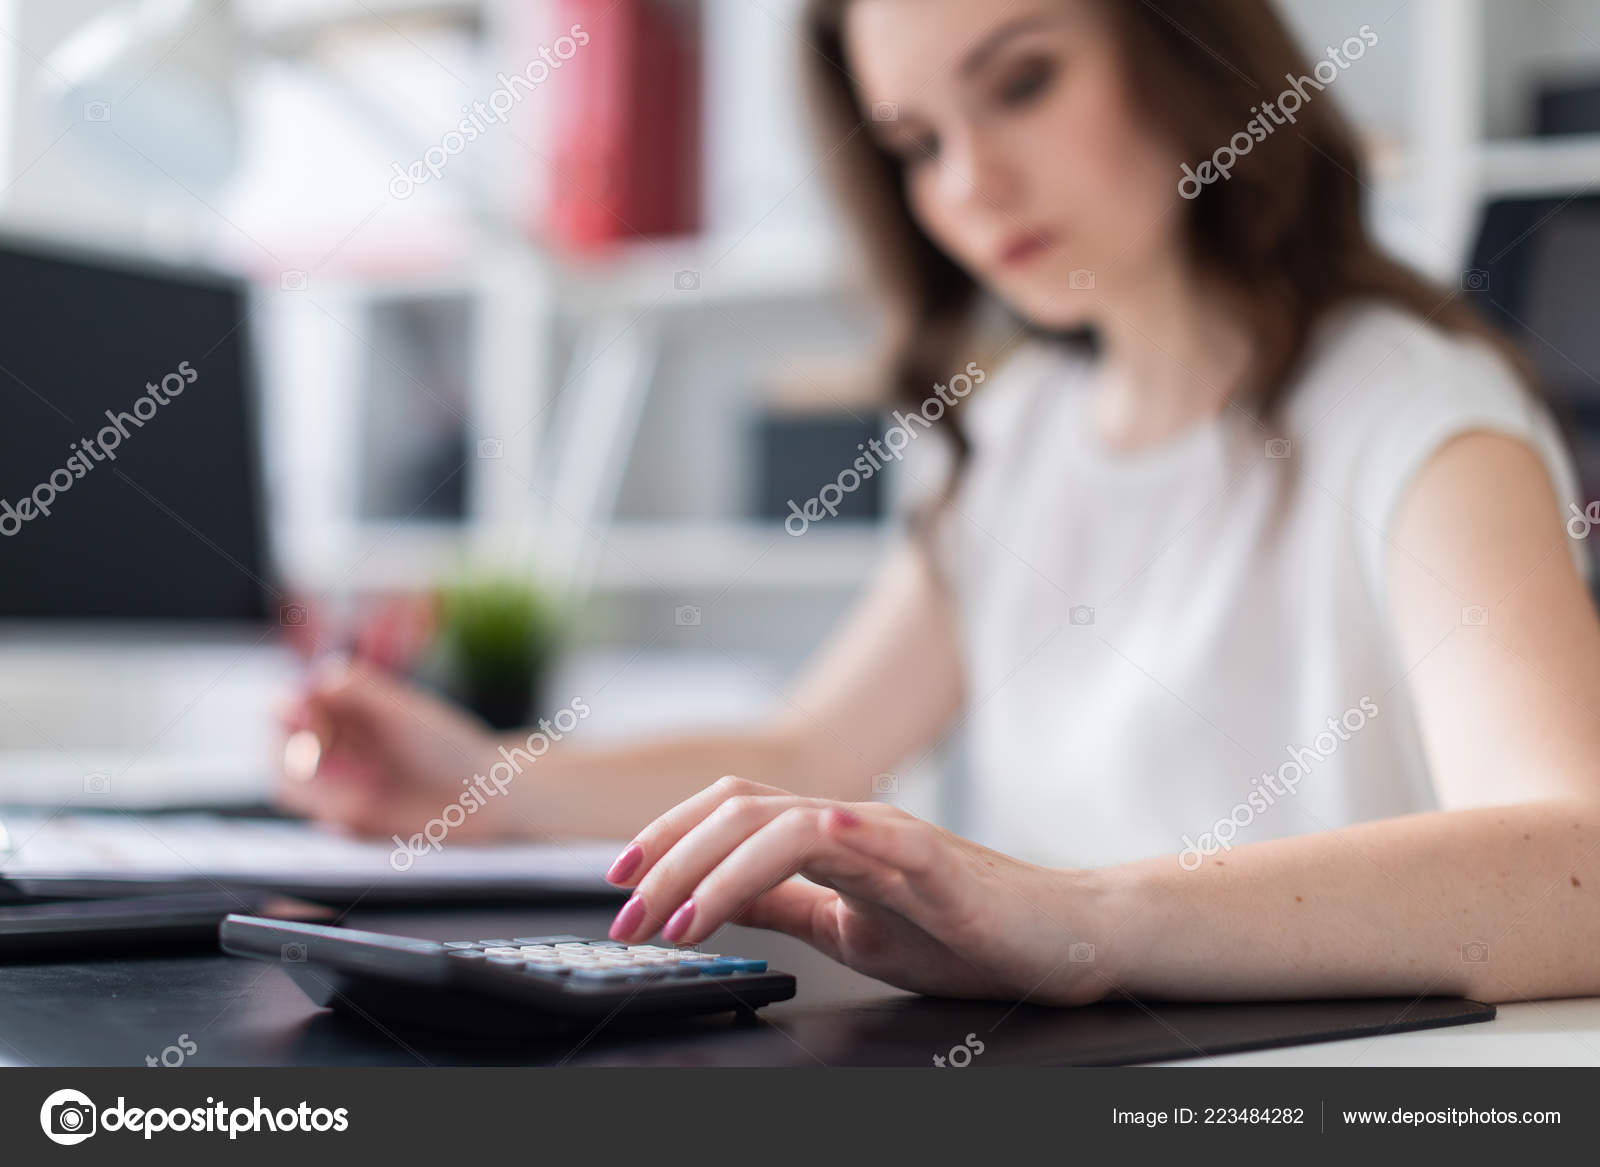 A Young Girl Sitting In The Office At A Computer Desk And Counting